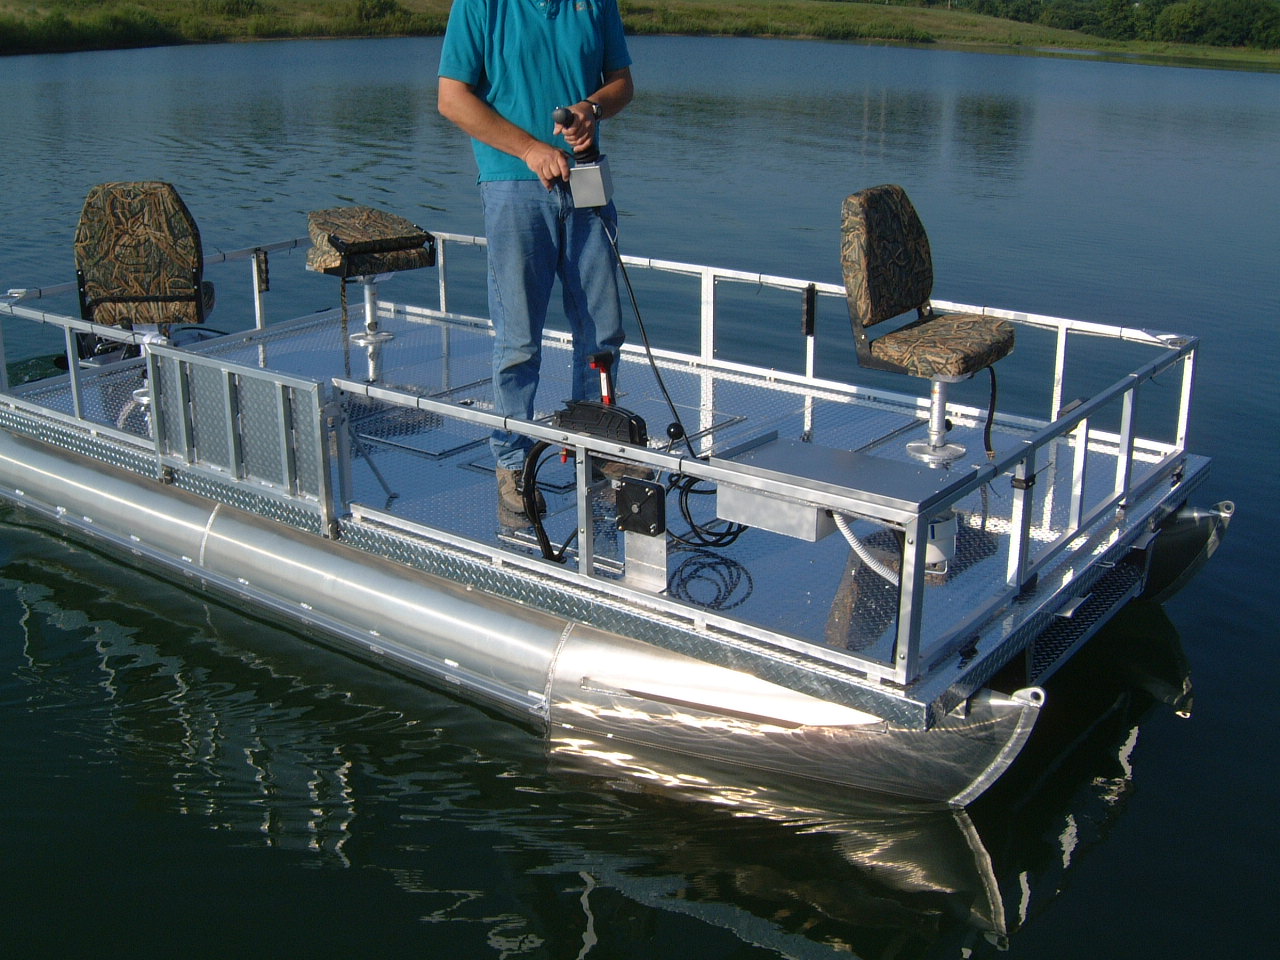 Pontoon Boat Plans Free How To and DIY Building Plans ...